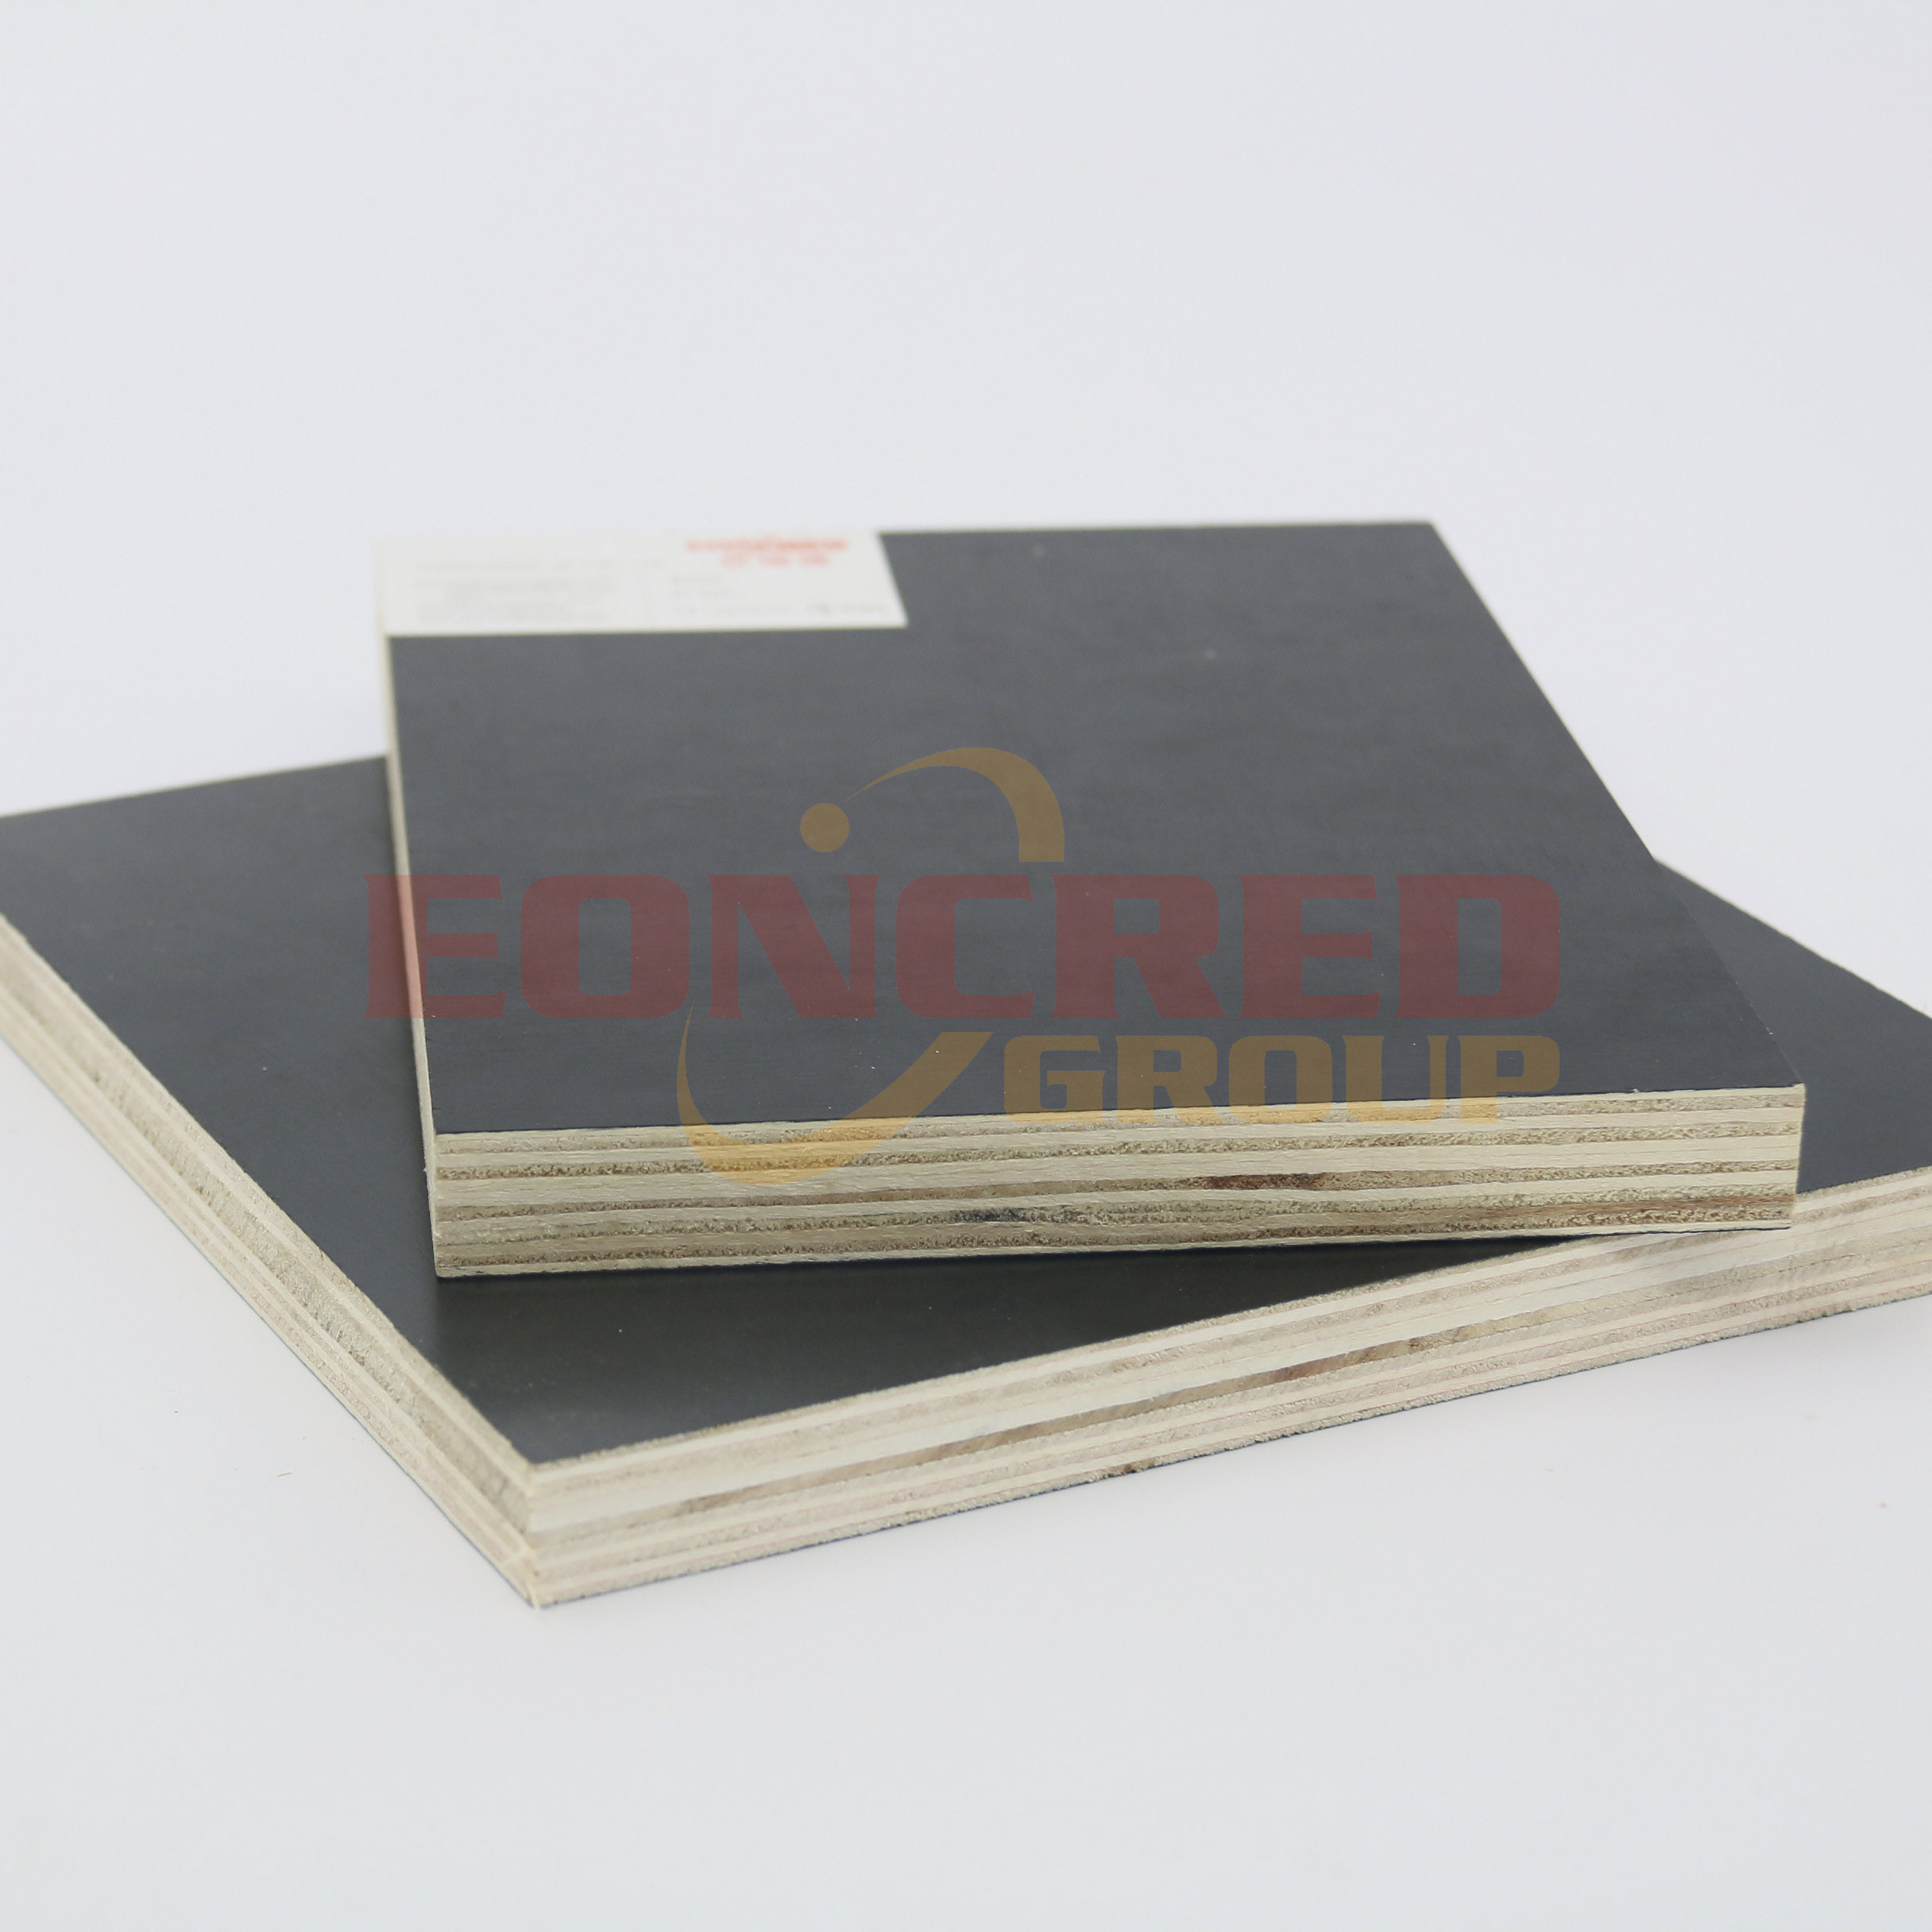 Film Faced Plywood Plywood Film Plywood Concrete Building Construction Use Film Faced Panel Formwork Plywood